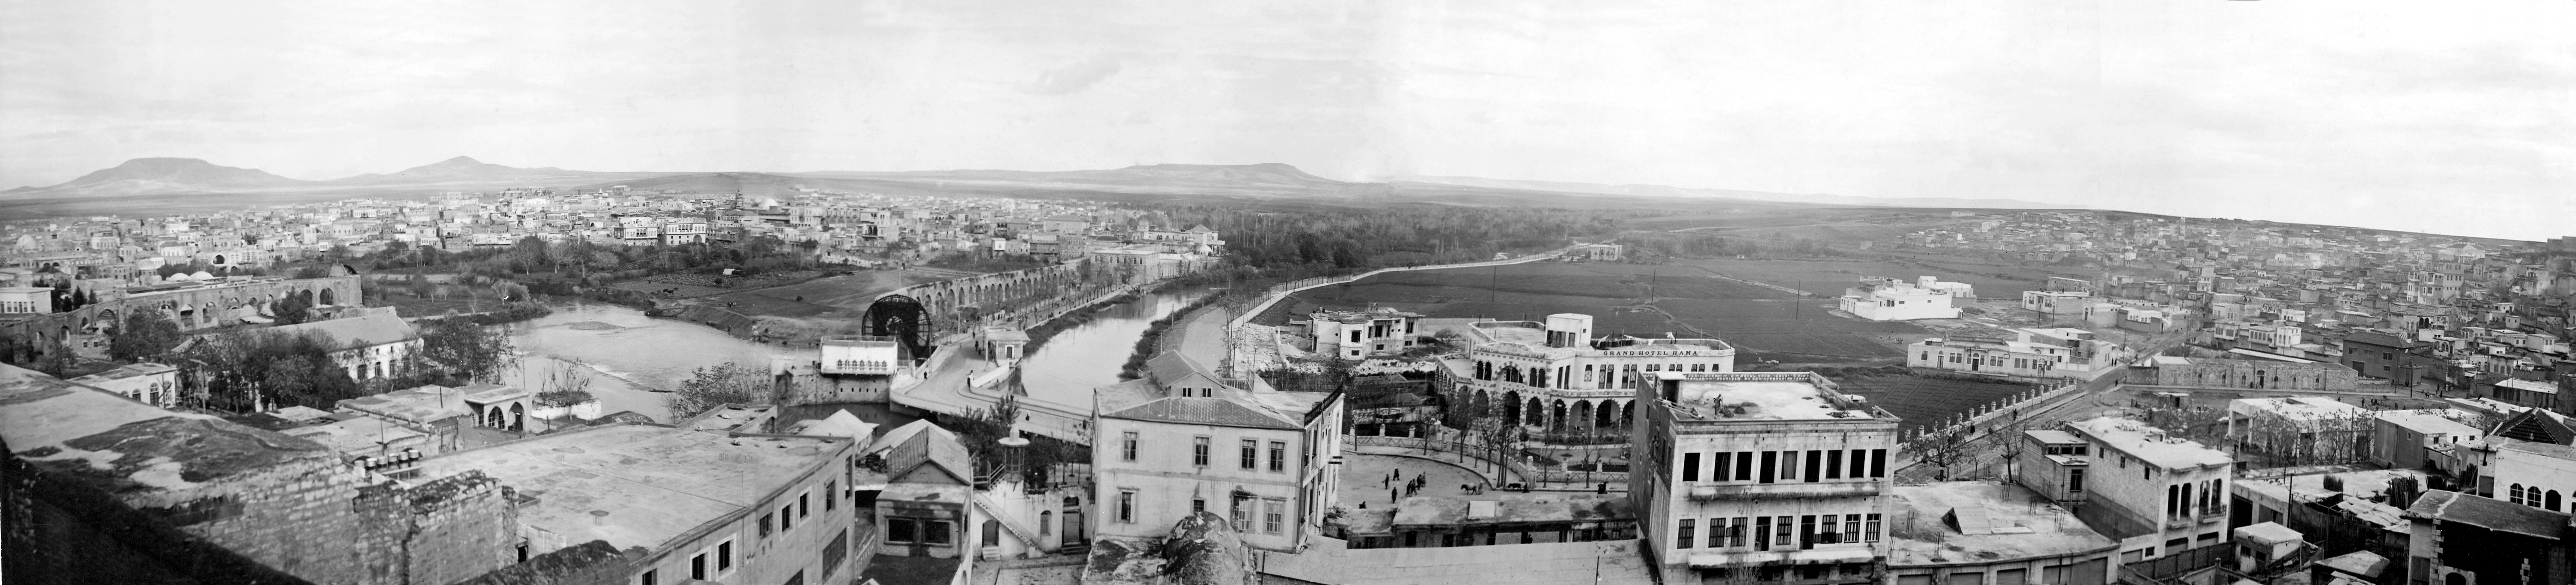  Hama - <p><strong>Hama, view from the Western Bank of Orontes River towards Al-Hadir Area</strong></p><p>Taken from the Al-Bashura quarter, this panorama captures the Al-Hadir area from the western bank of the Orontes River, where it curves northward. Notable features include the Noria al-Jisriyya and the water canal leading to the al-Arnaʾut palace. The scene also includes the new-looking hotel of Abi al-Fida and the al-Farraiya quarter on the right.</p>